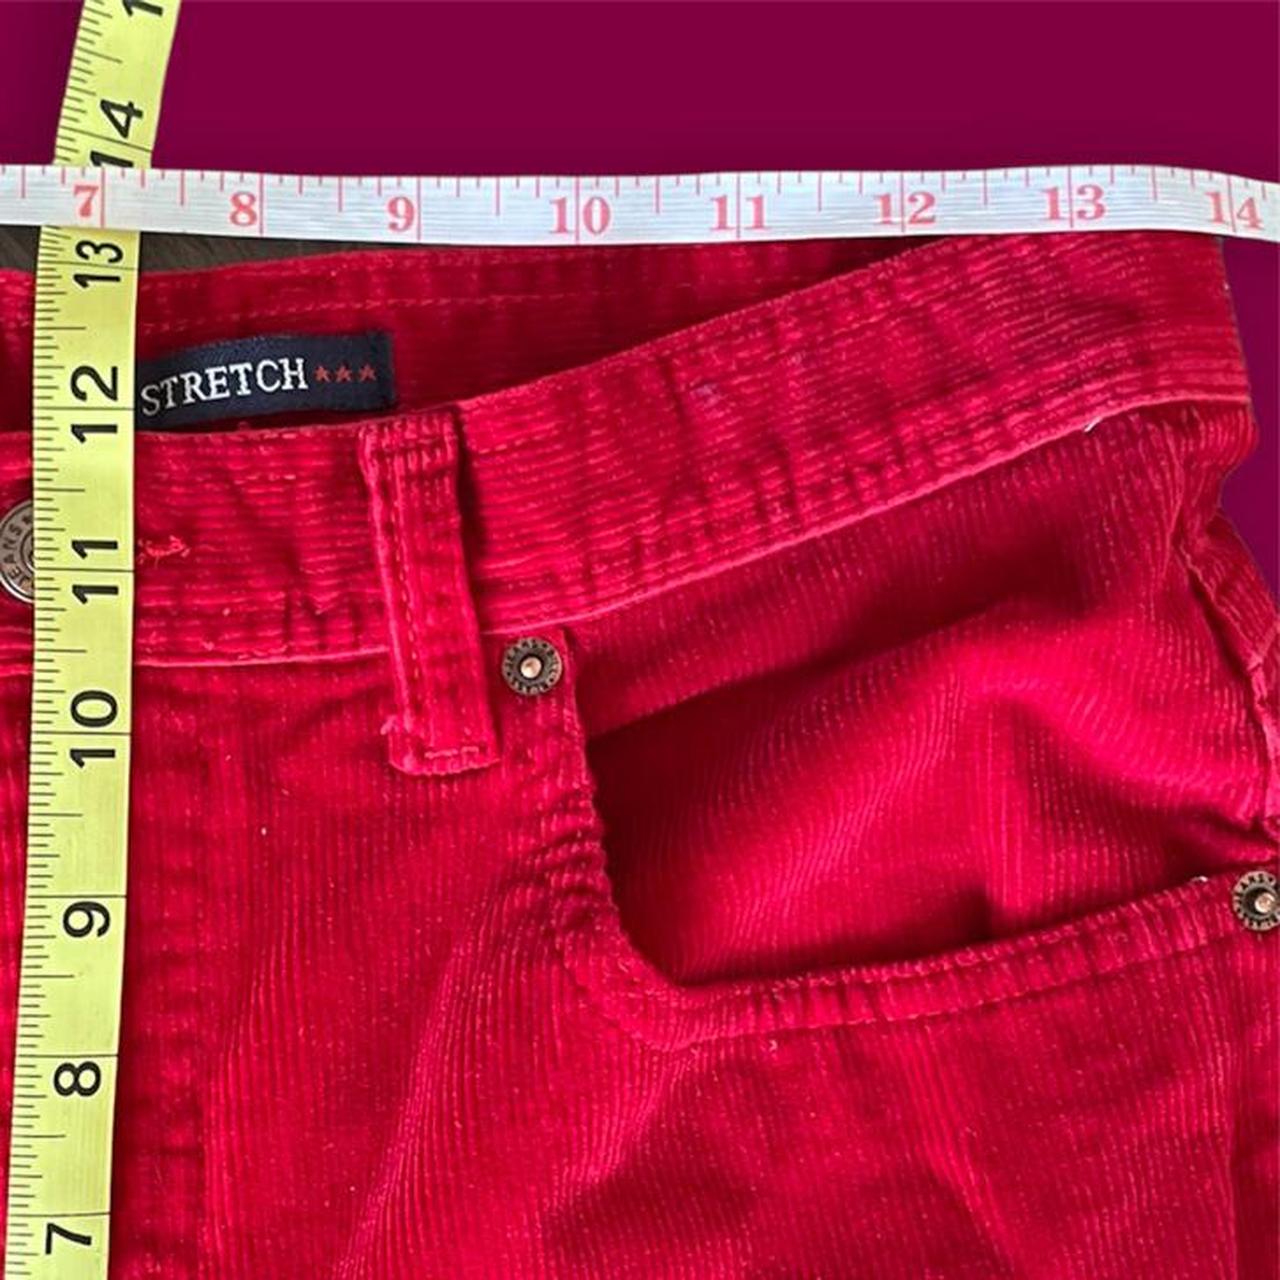 Product Image 3 - Bill blass red corduroy jeans
Stretch